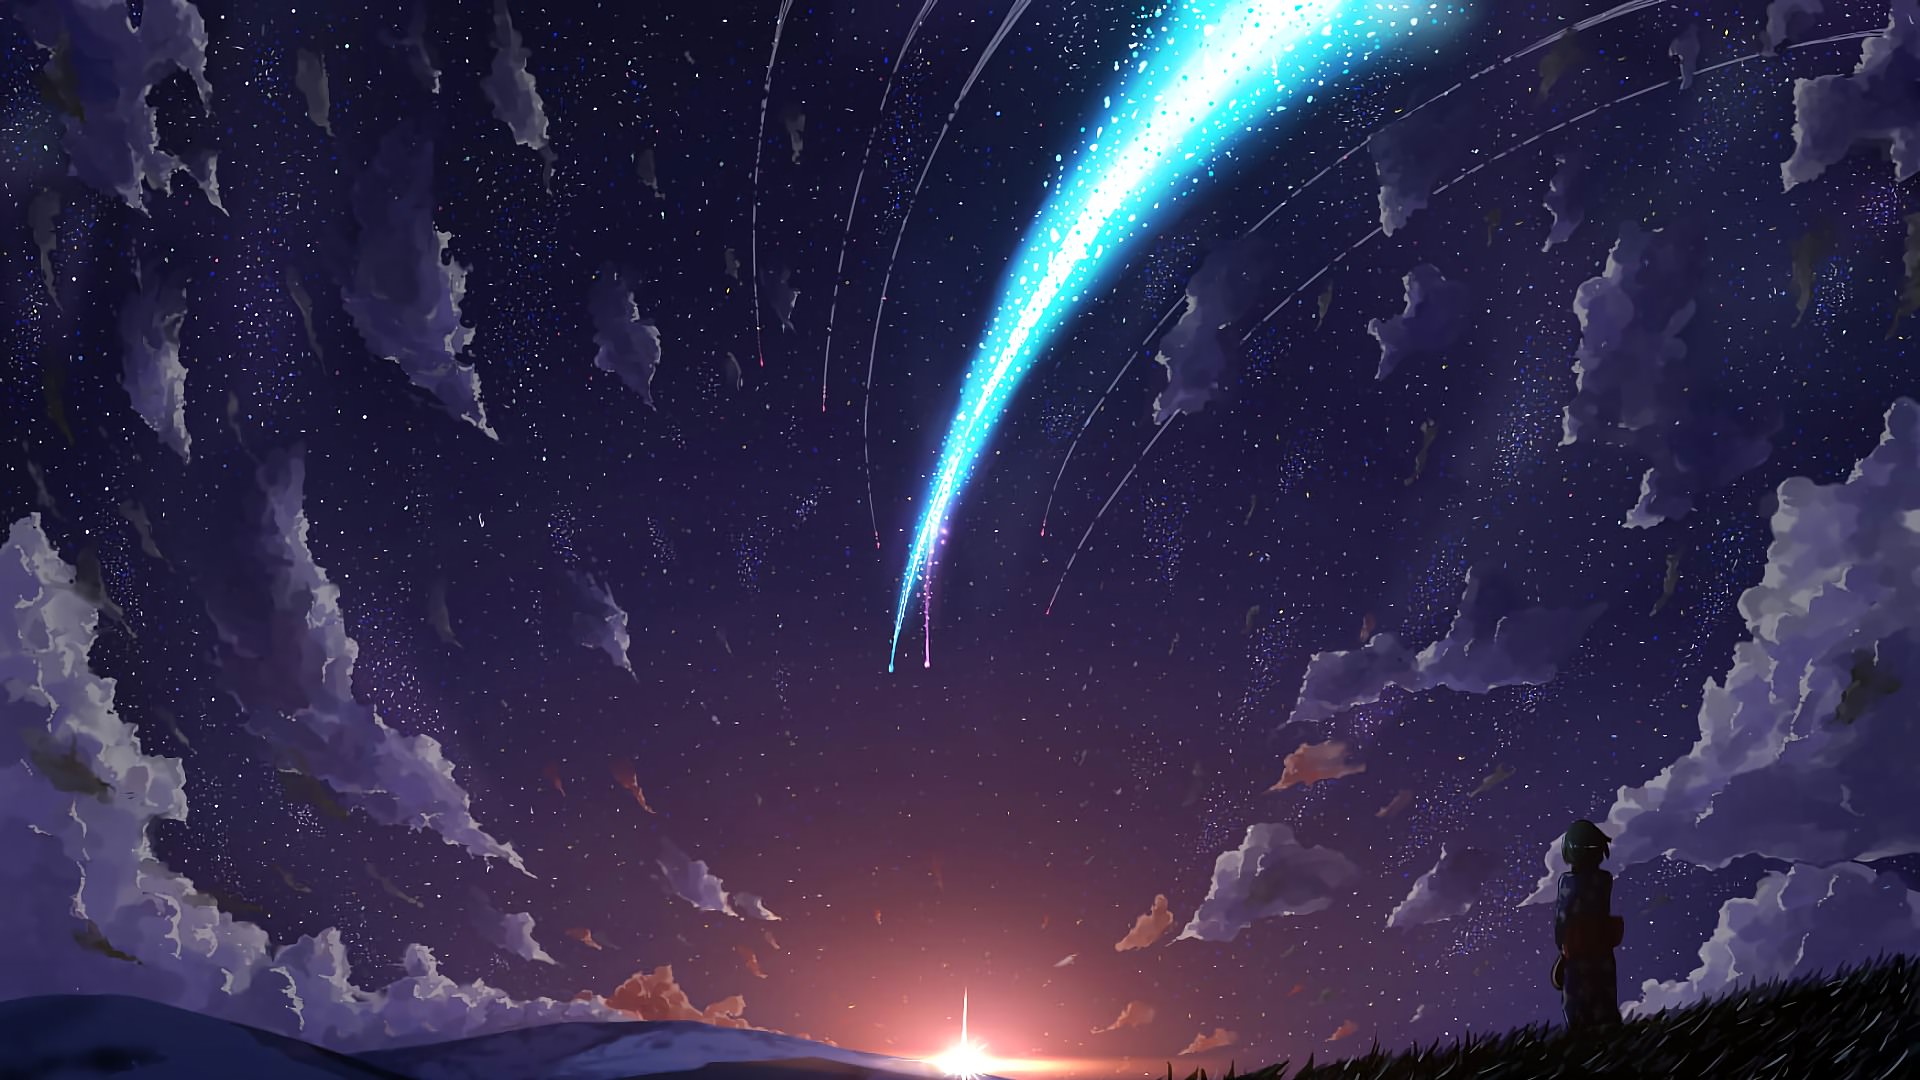 Your Name Landscape Wallpapers